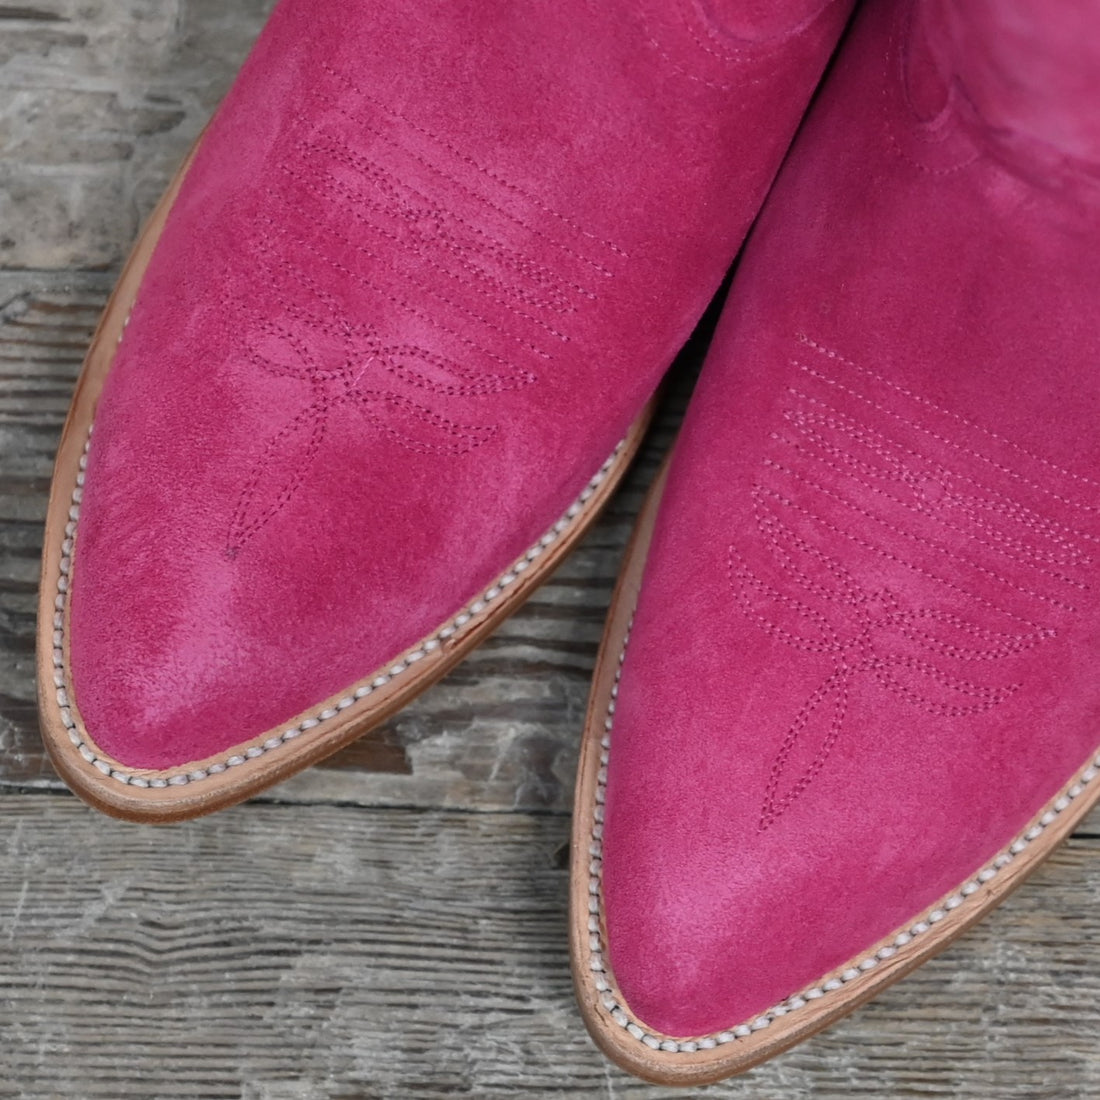 Macie Bean If Karlee were a Cowgirl Boots in Hot Pink Suede view of toe